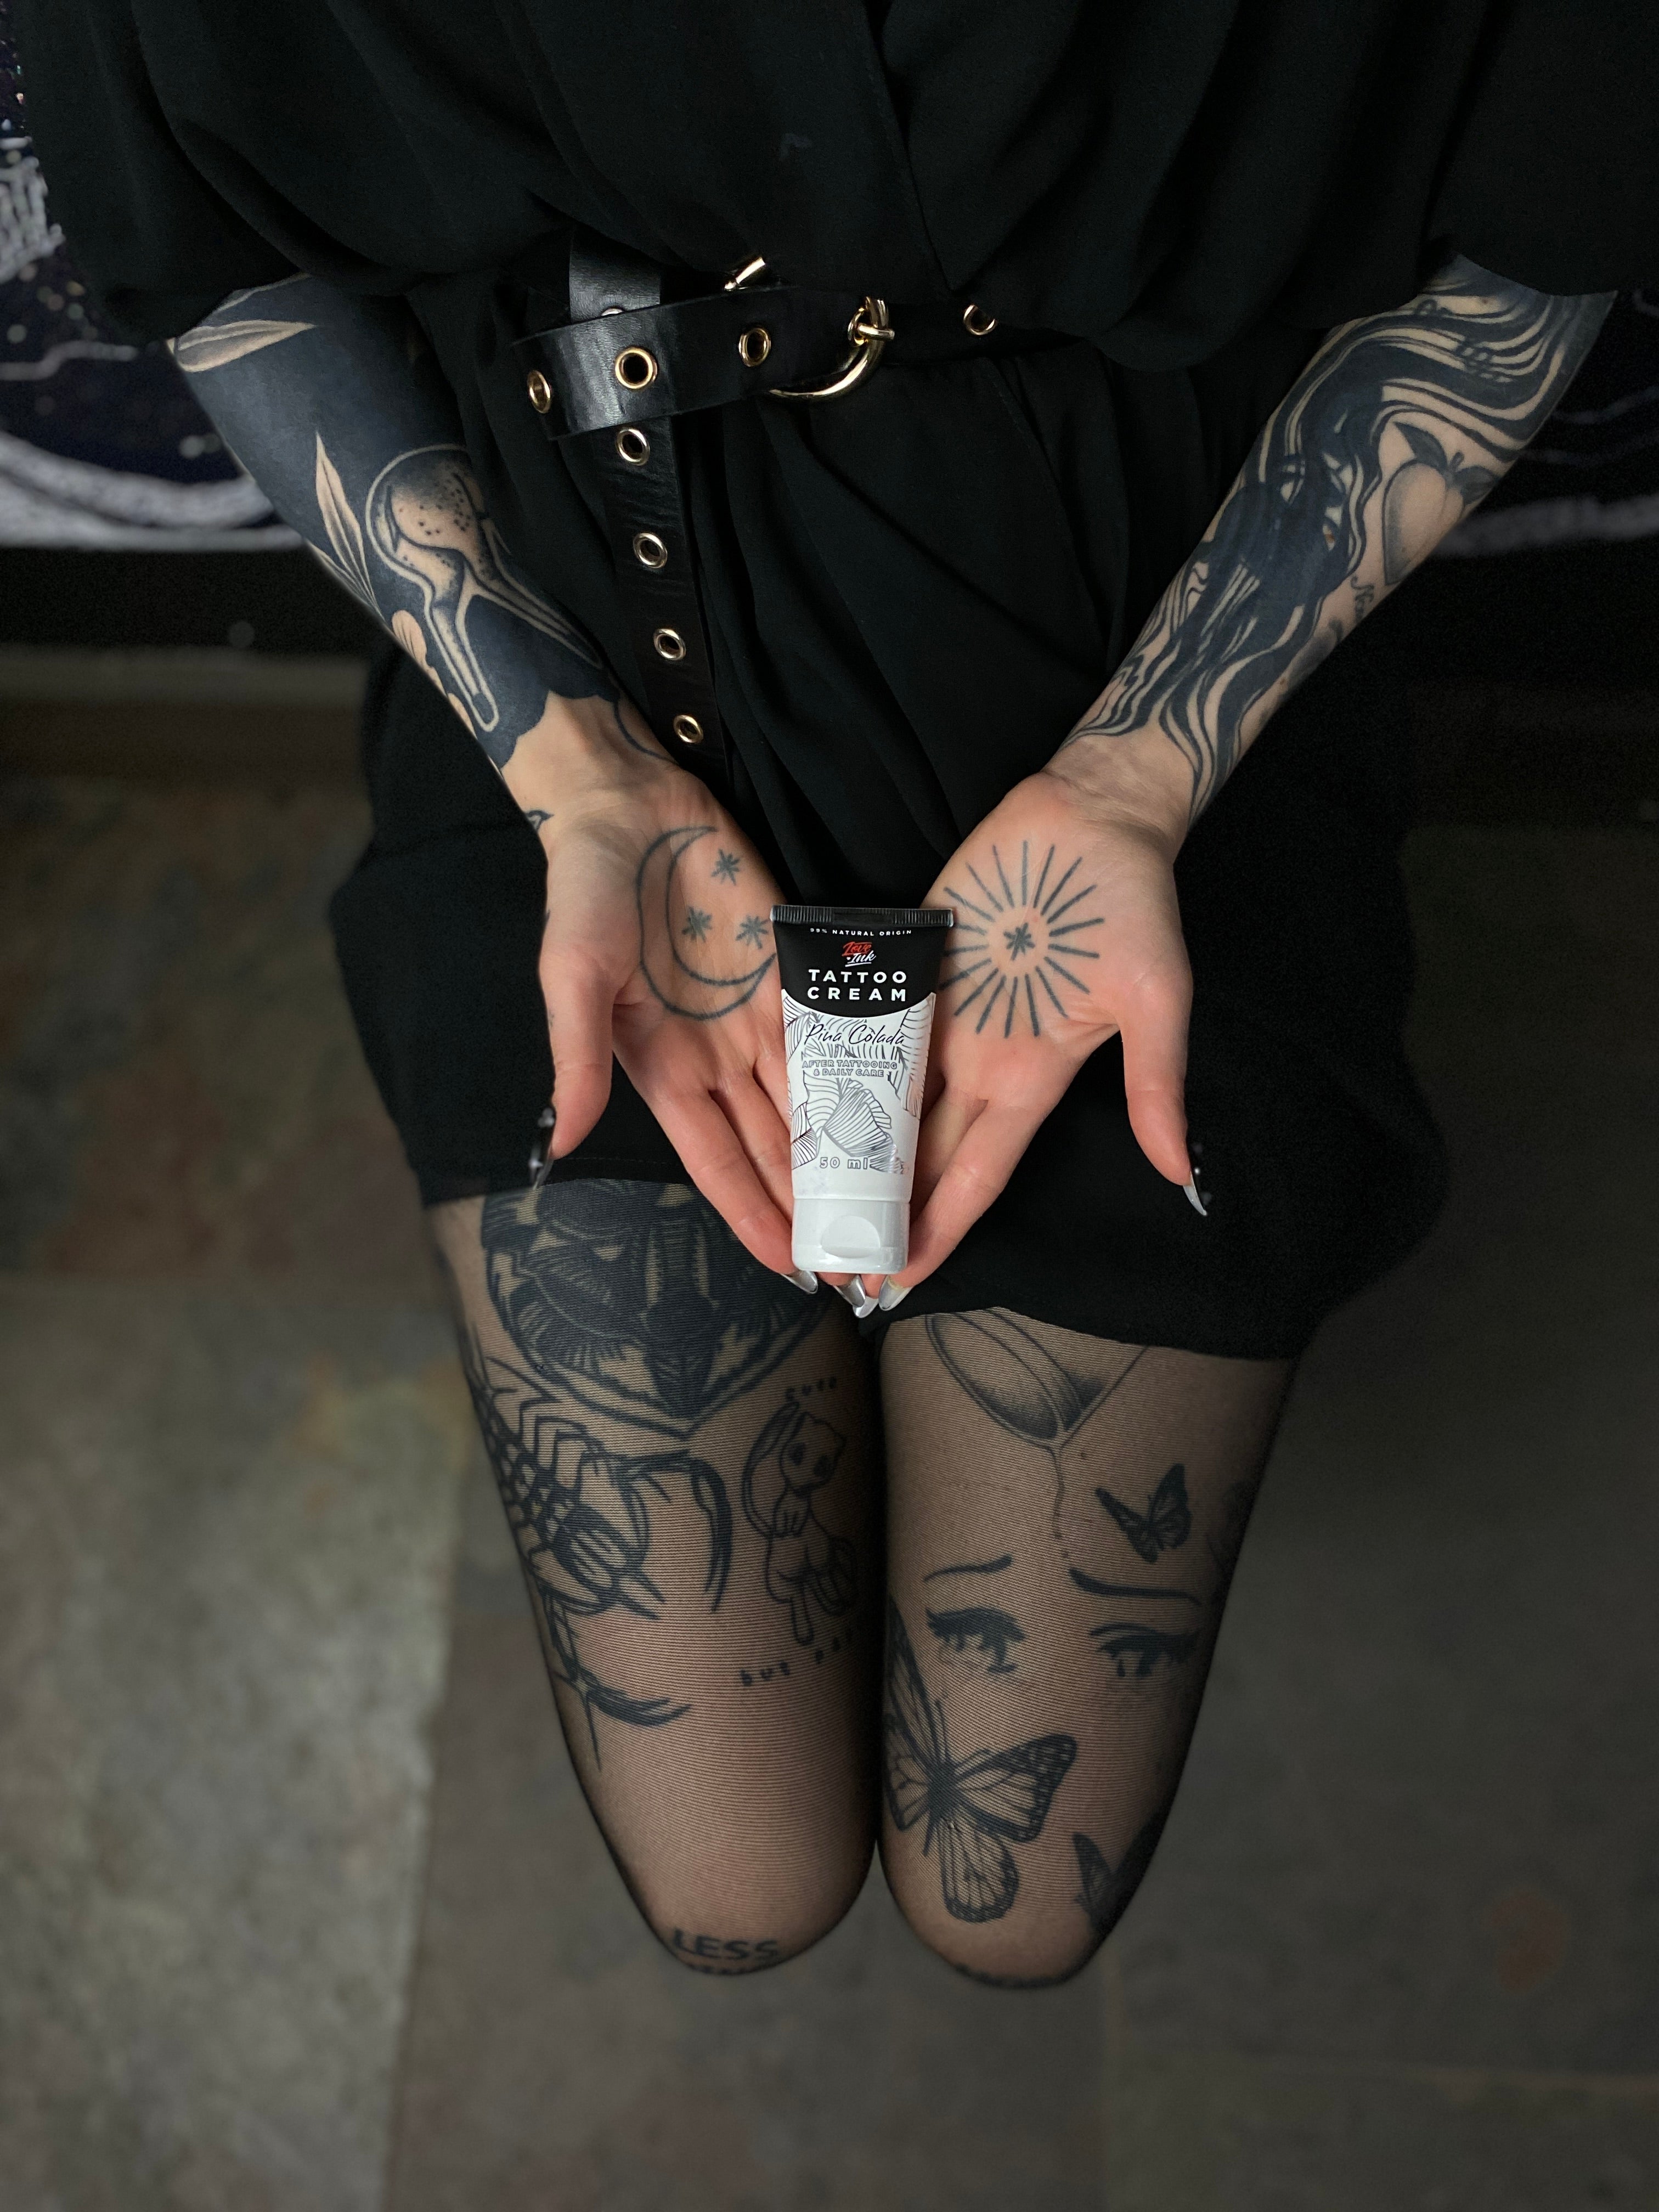 7 Things That Can Ruin Your New Tattoo - Inked Ritual Tattoo Care - INKED  RITUAL